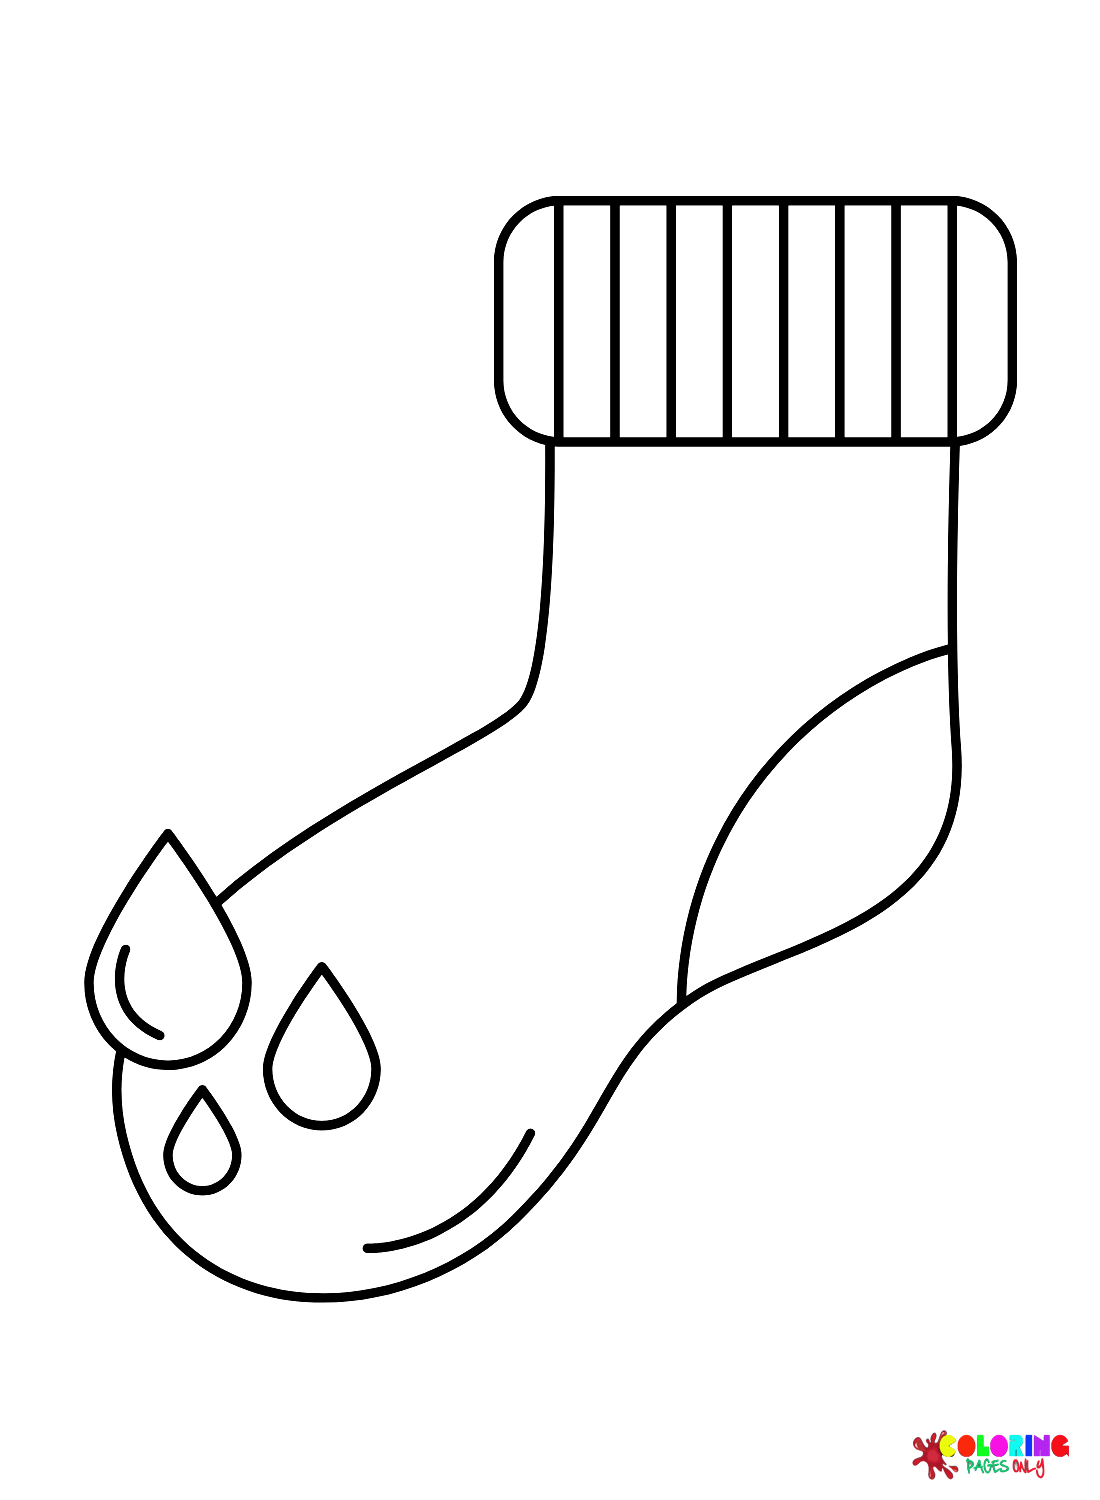 Cartoon Sock Coloring Page - Free Printable Coloring Pages